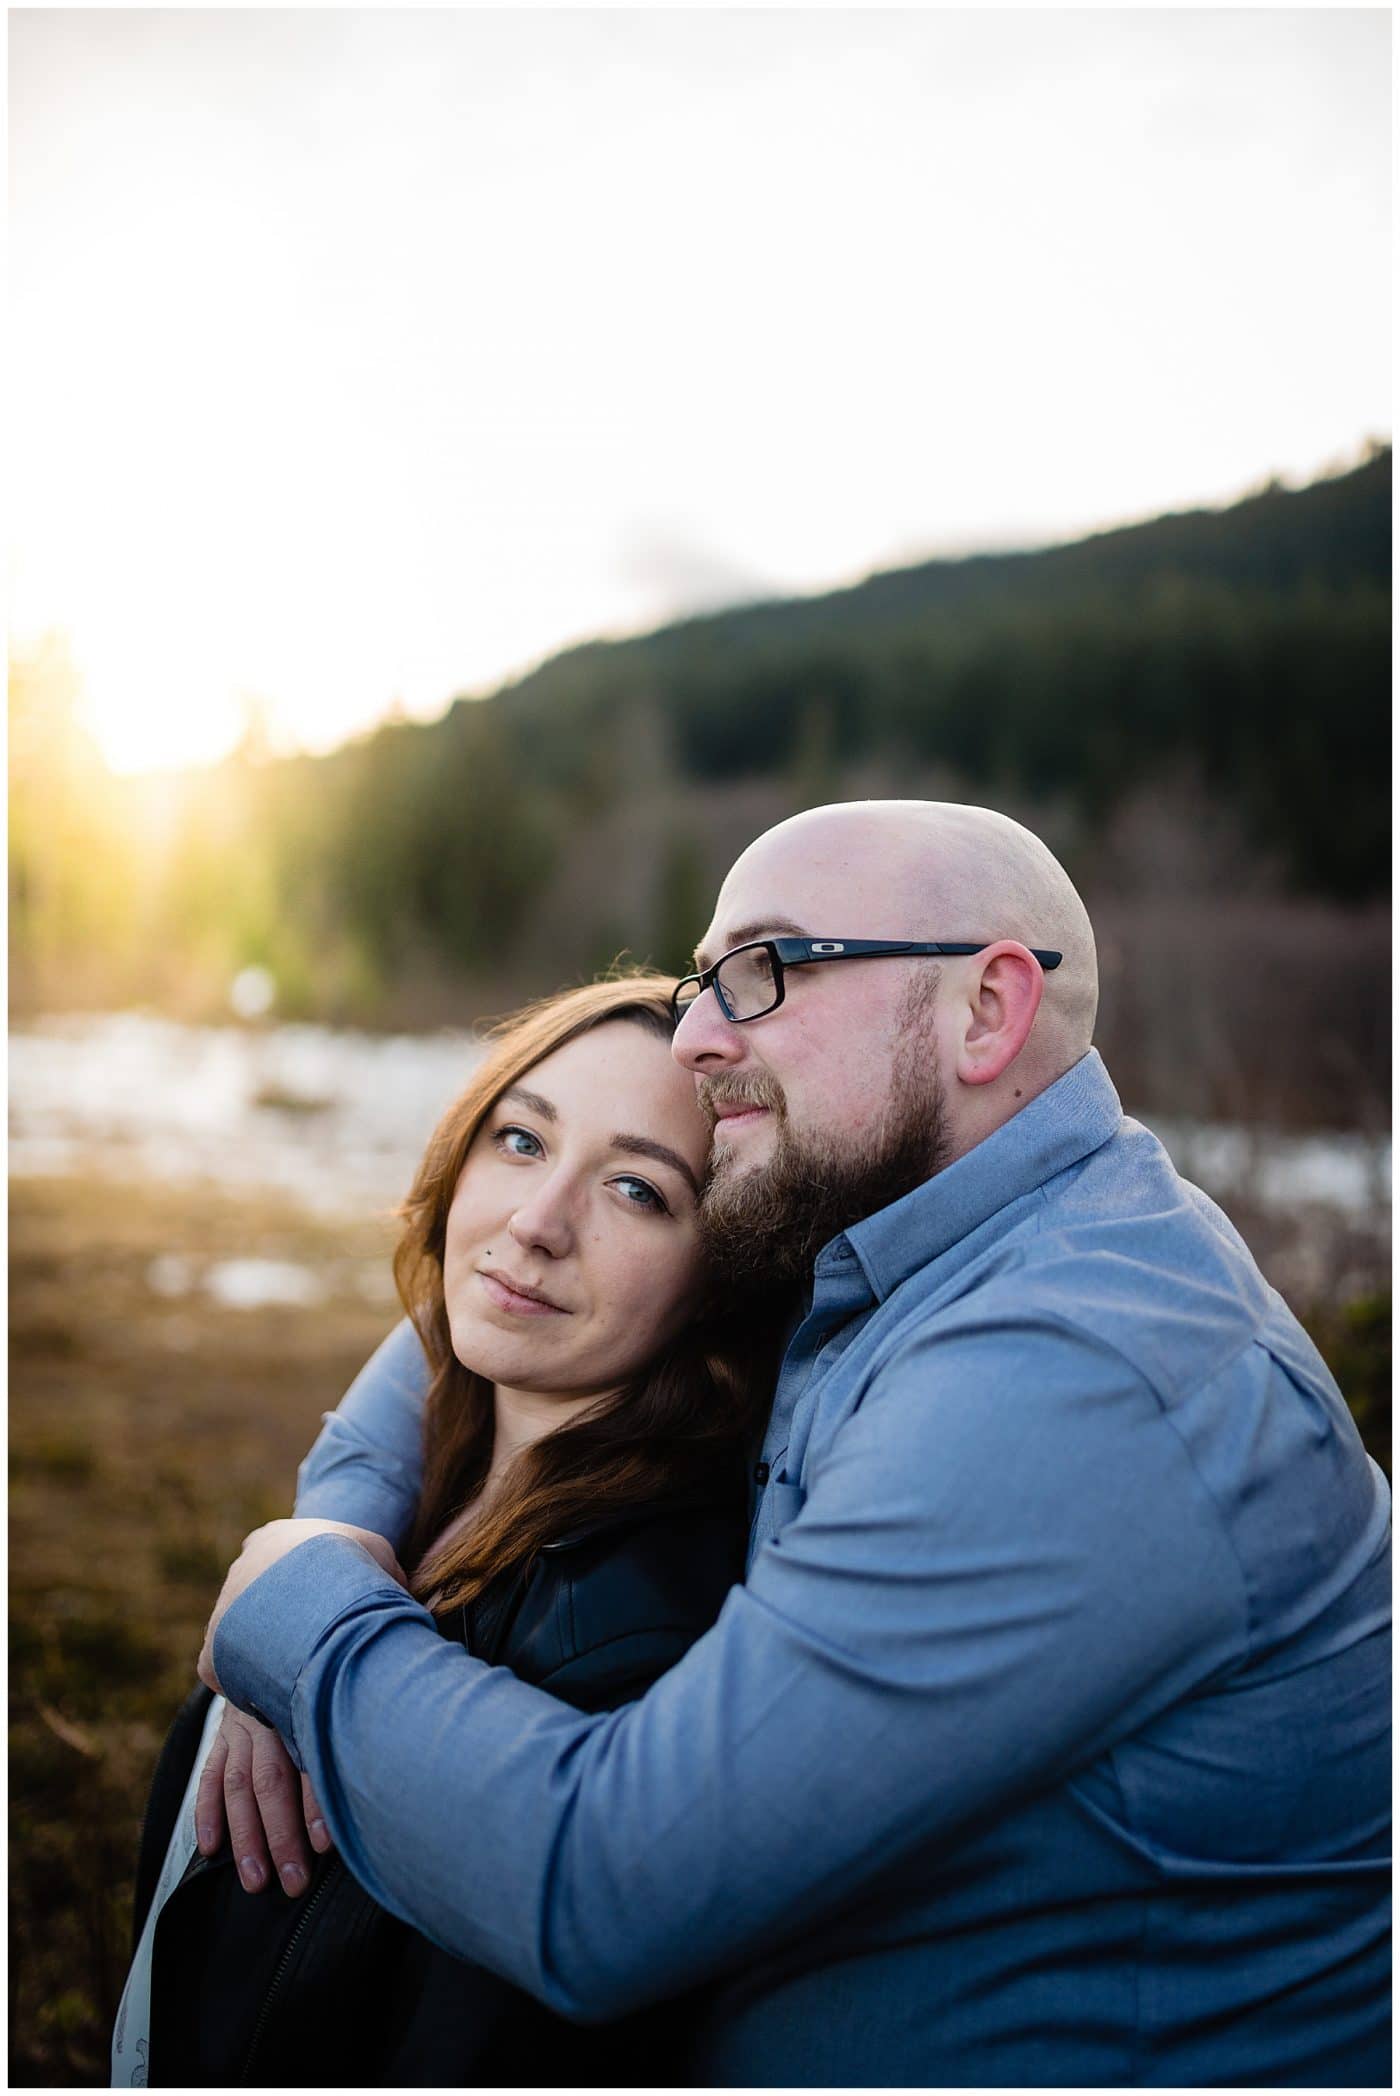 An engagement story where the couple embrace at sunset